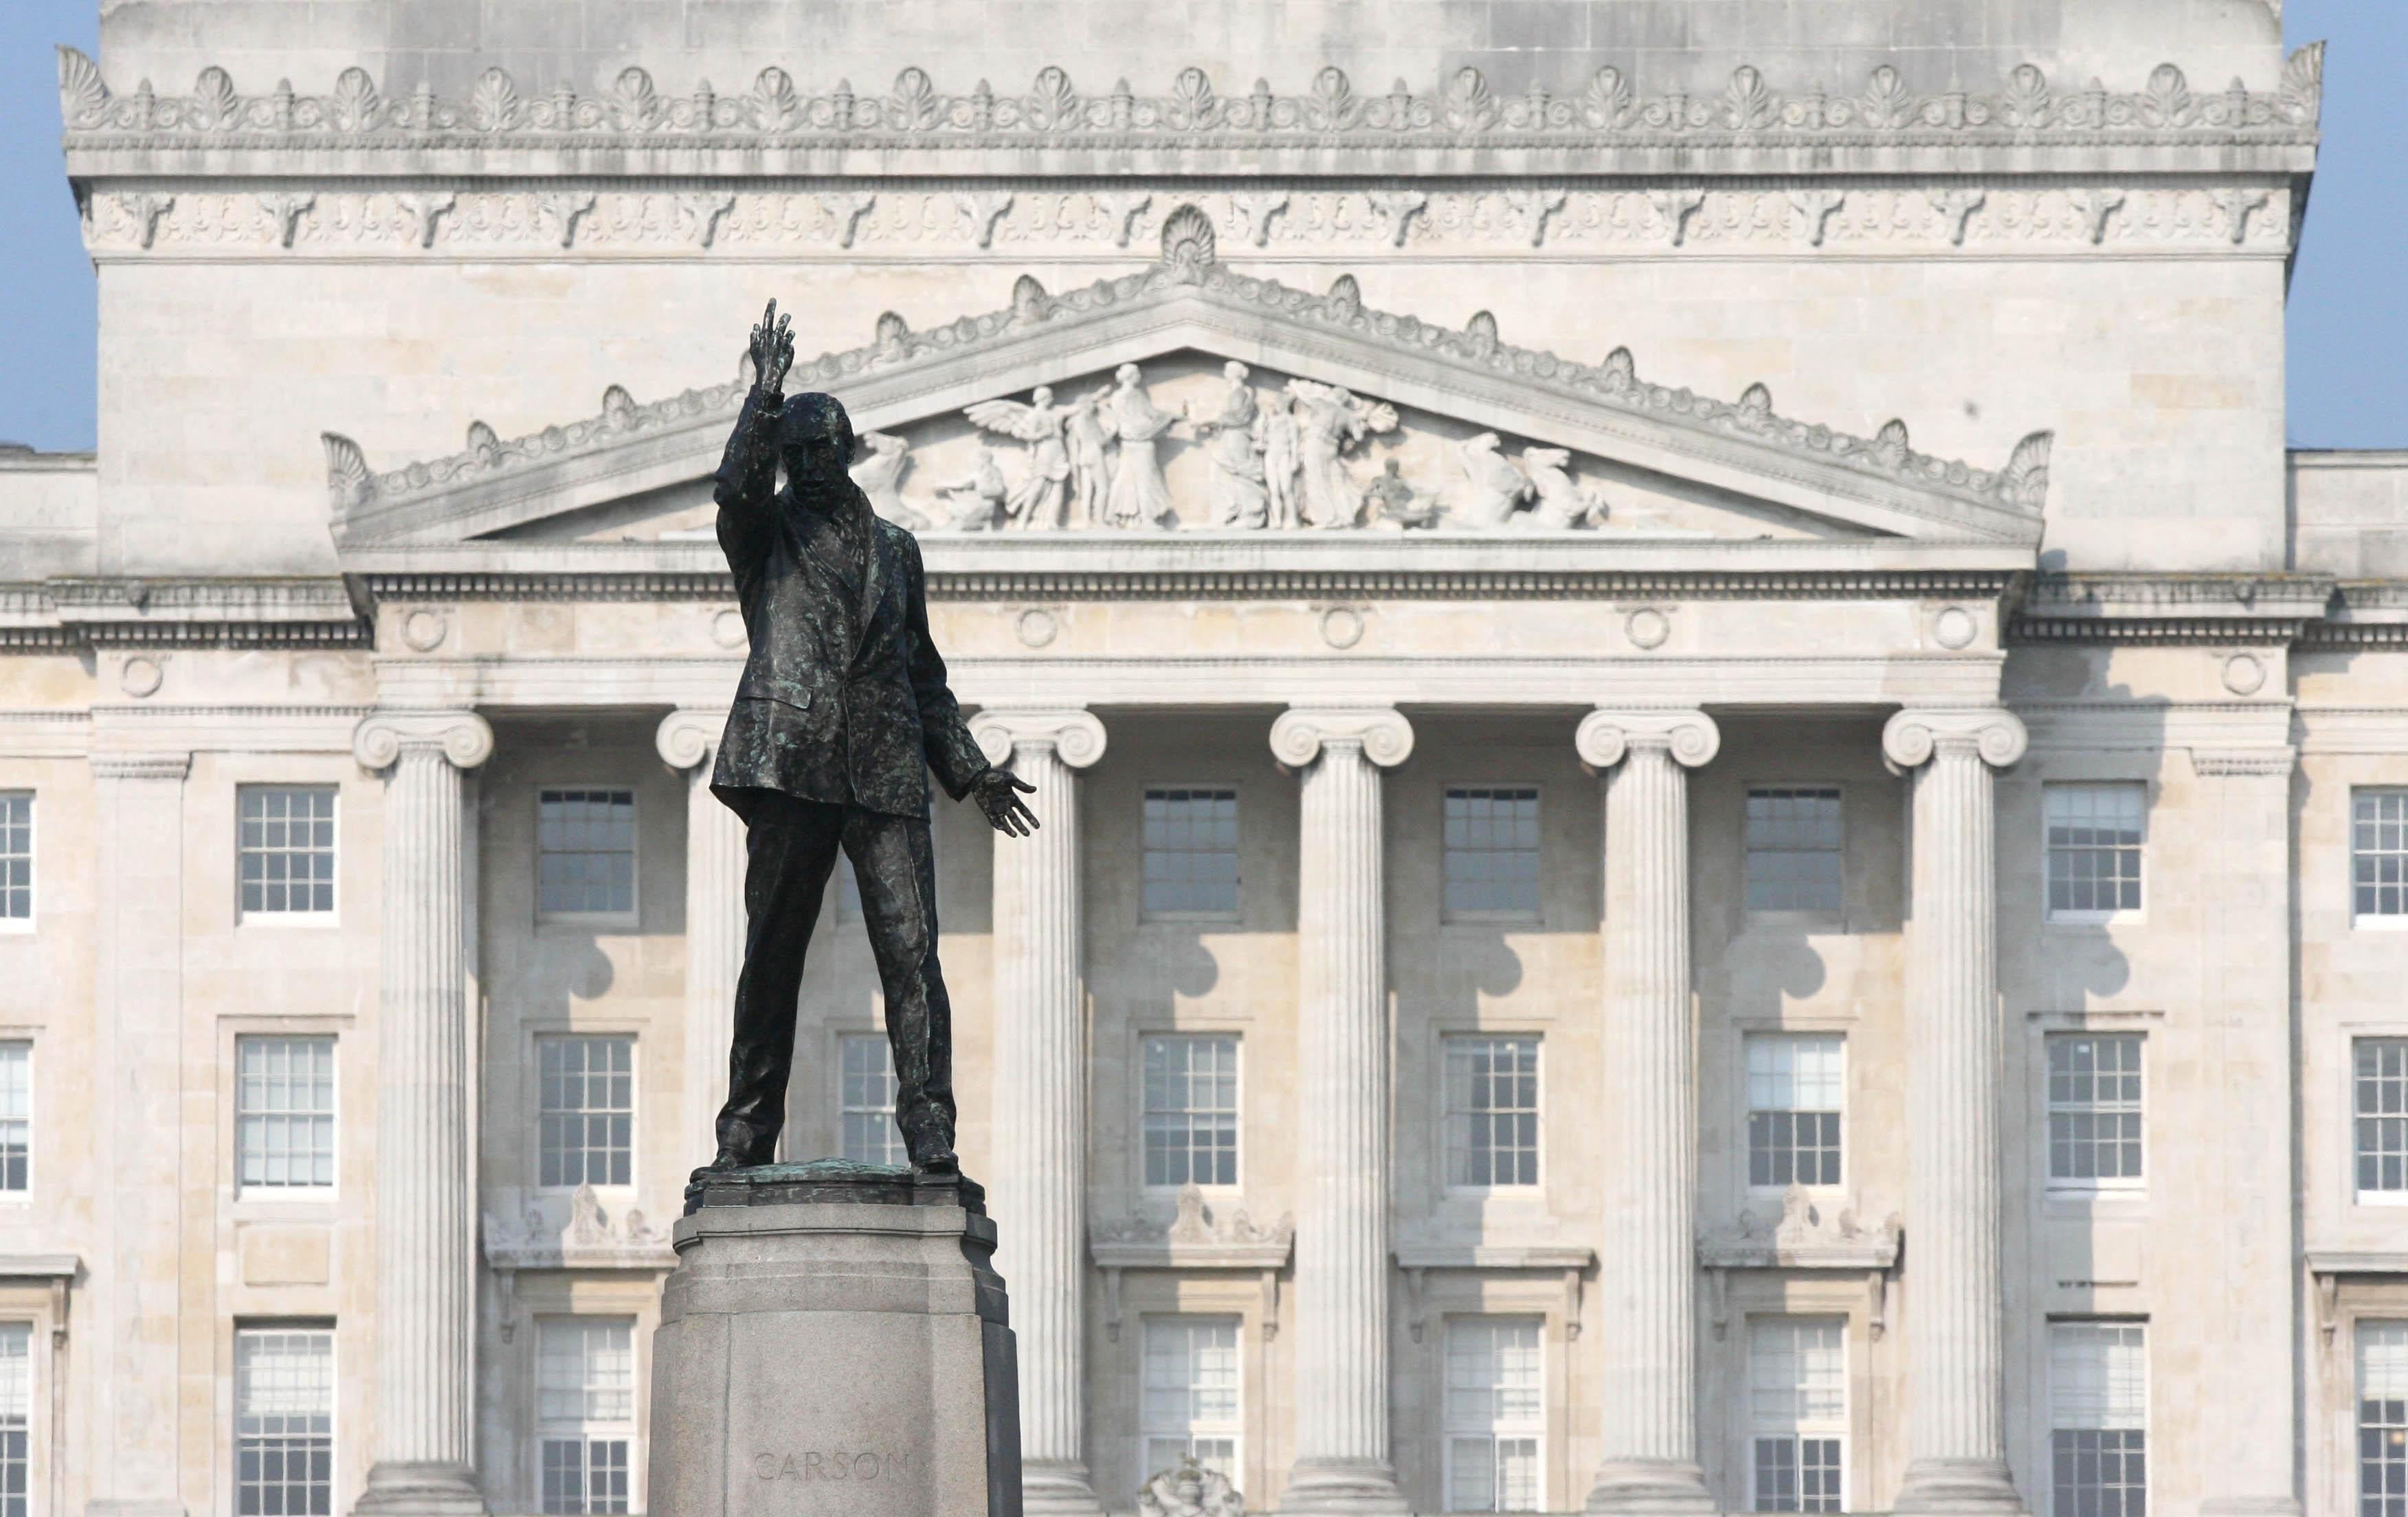 A statue of Sir Edward Carson looks out on the grounds of Stormont Assembly in Belfast (Niall Carson/PA)